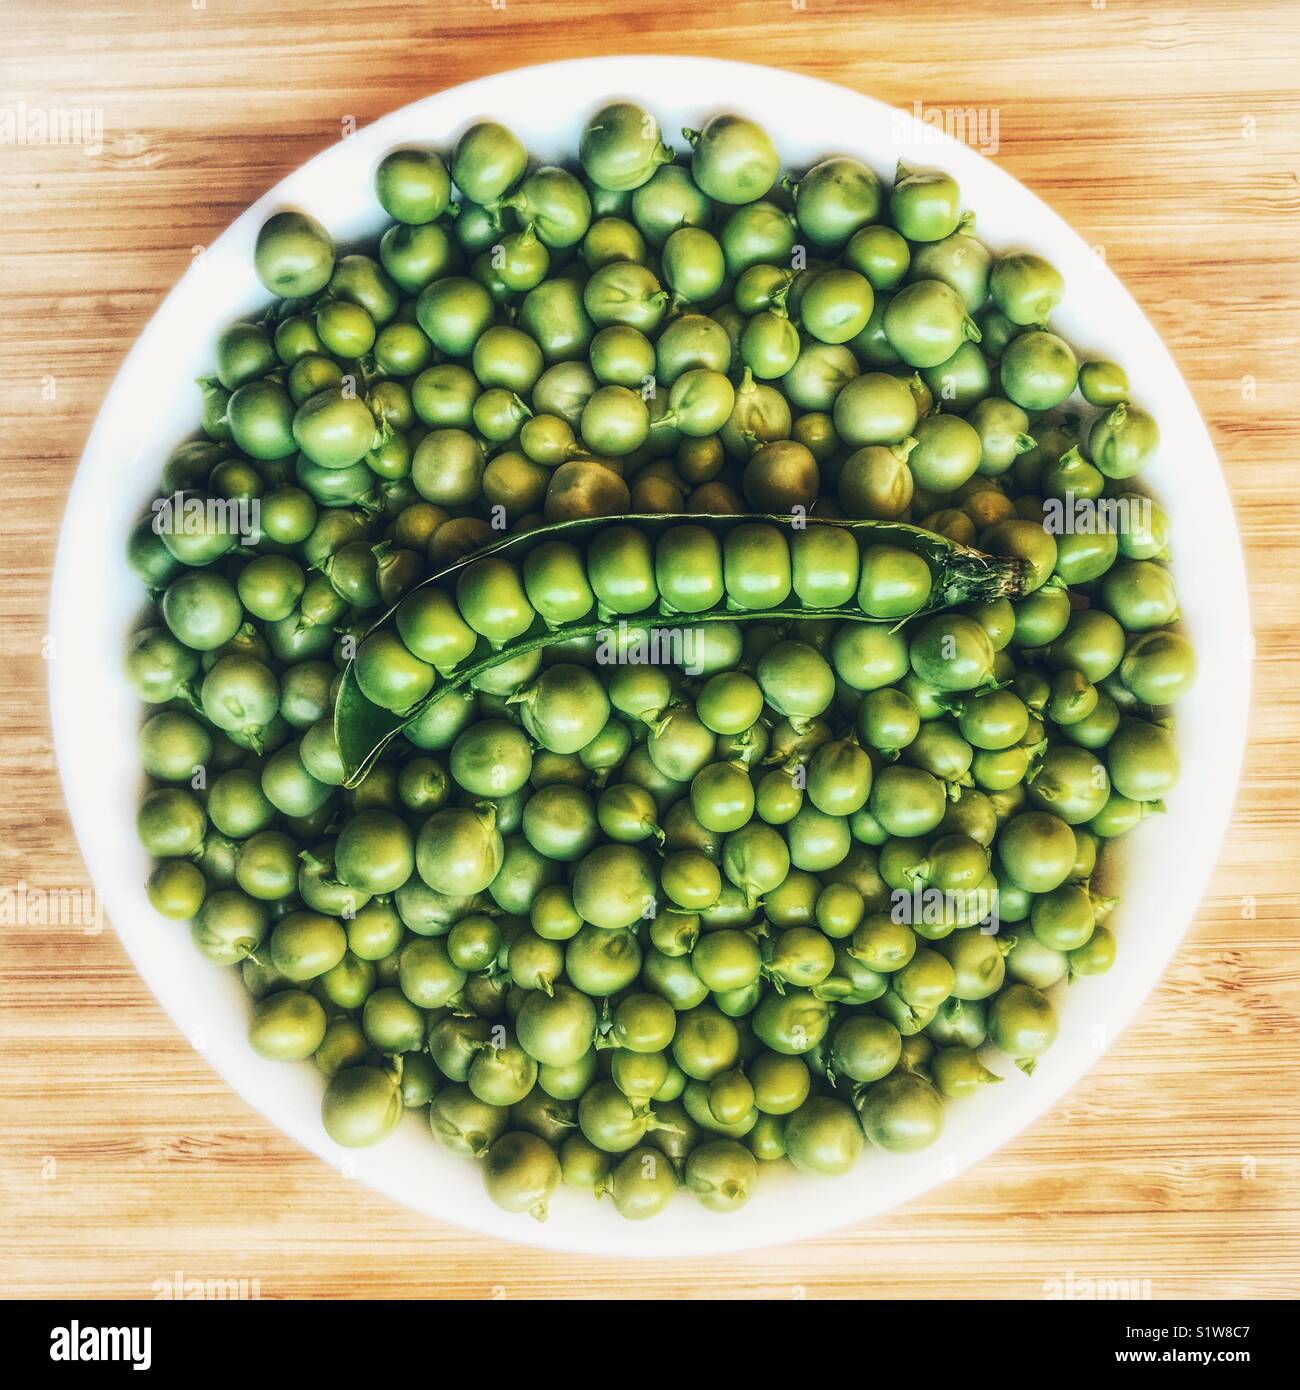 Bowl of fresh garden peas, and peas in a pod, high angle view Stock Photo